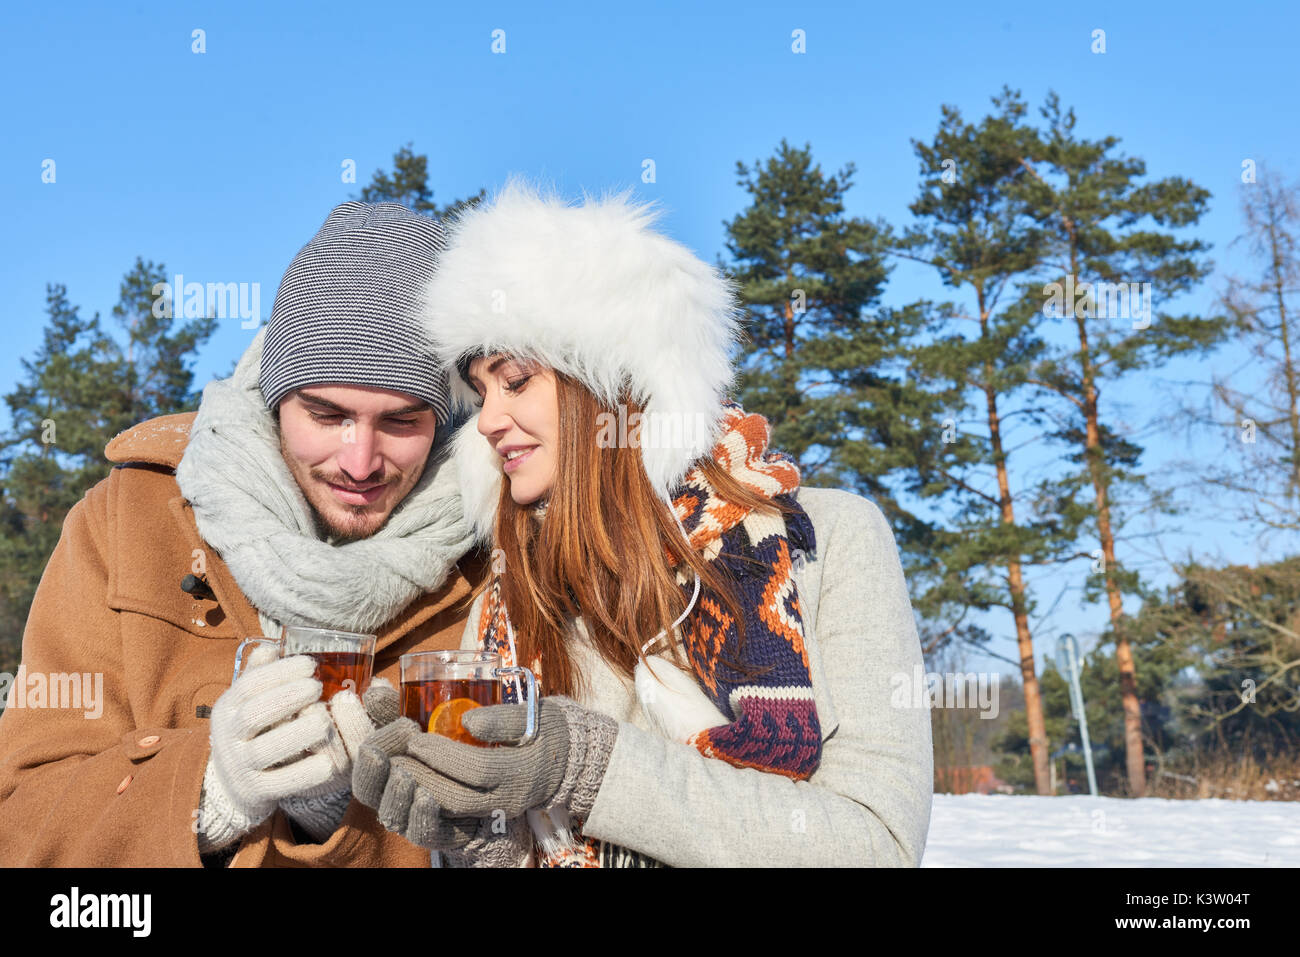 Couple in love drinks tea during their winter holiday relaxation trip Stock Photo